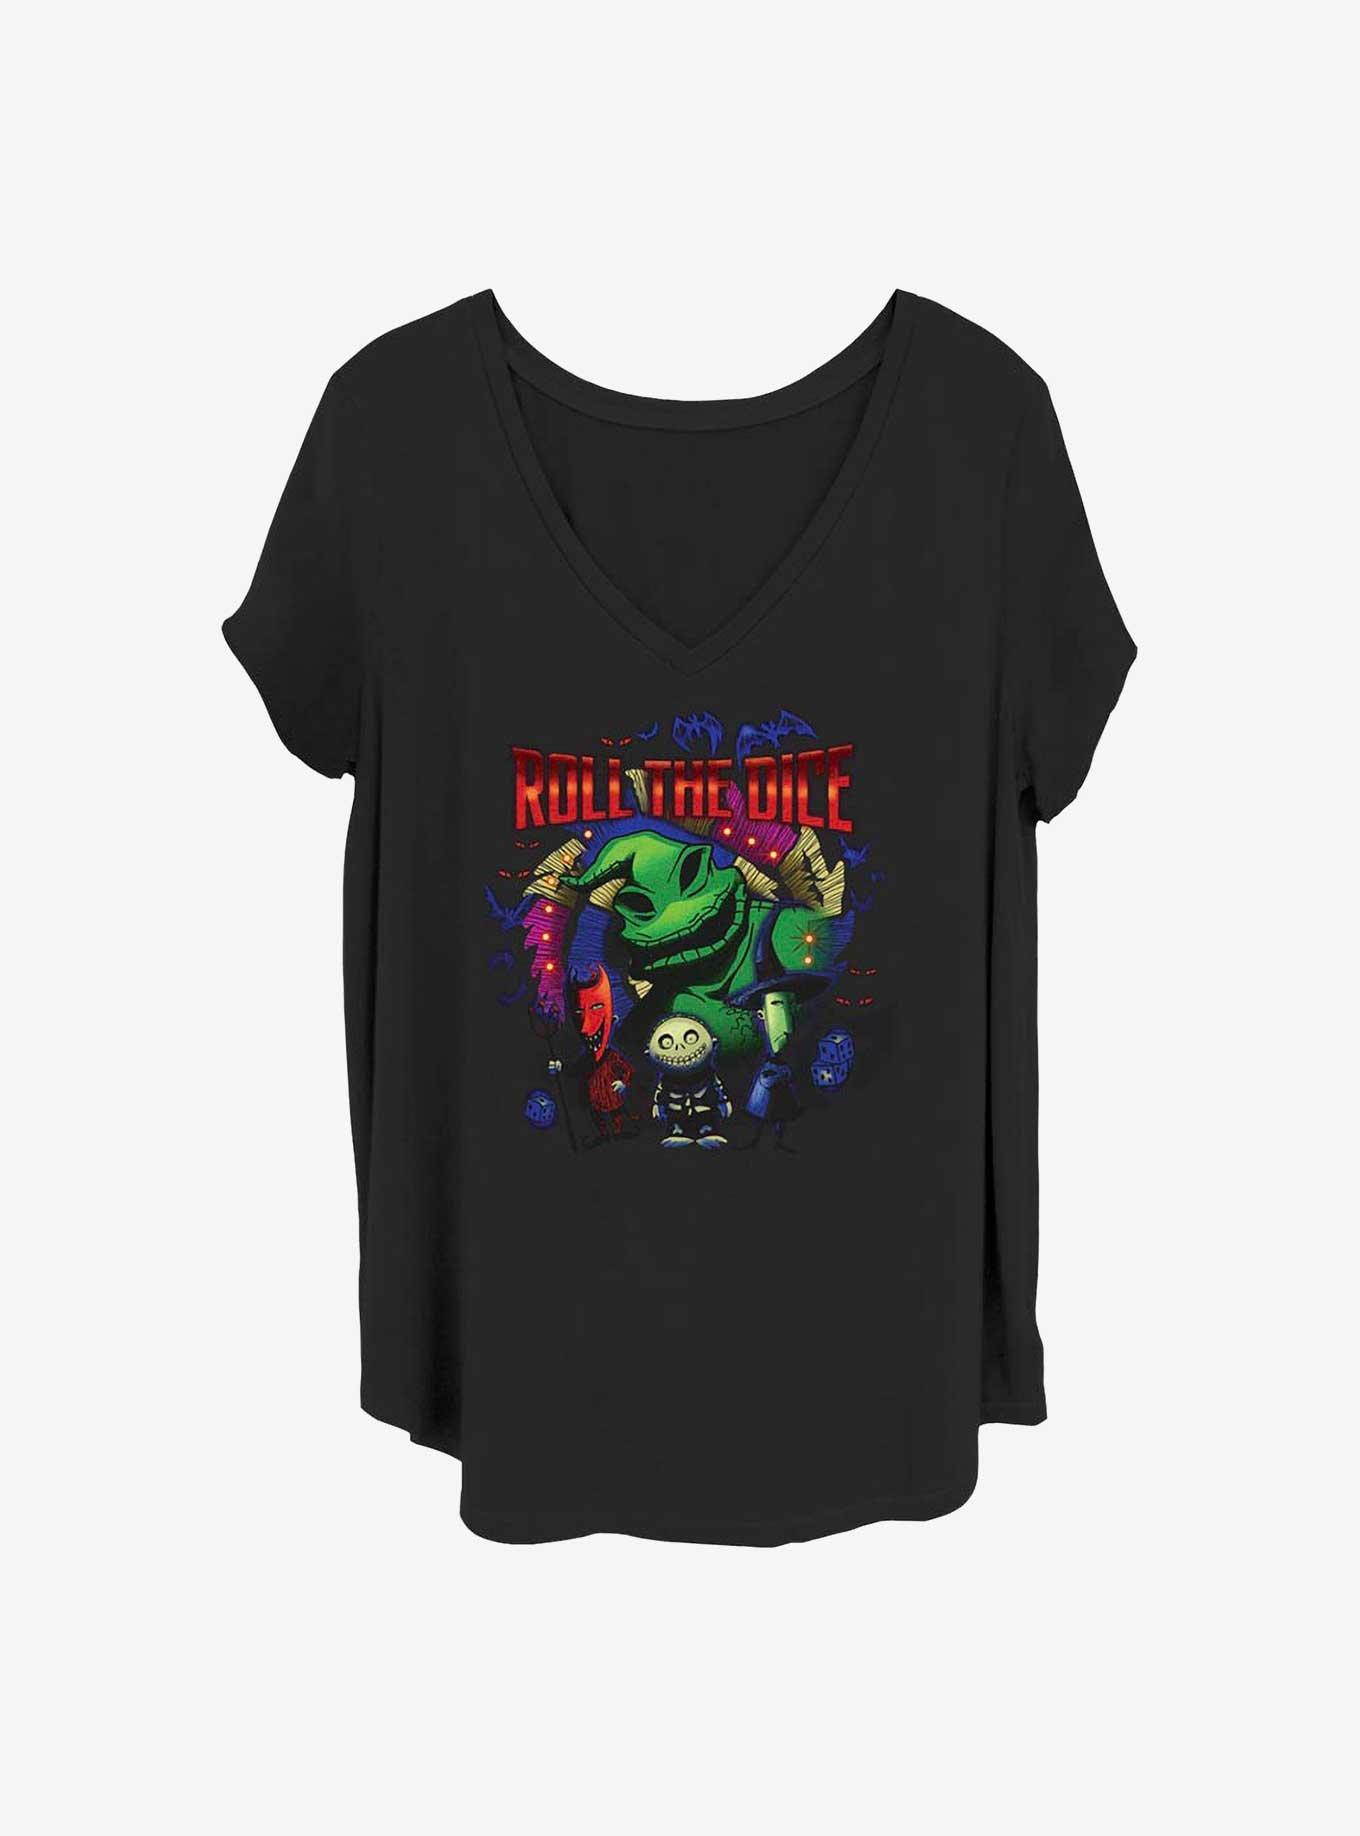 Disney The Nightmare Before Christmas Oogie Boogie Dice Girls T-Shirt Plus Size, BLACK, hi-res